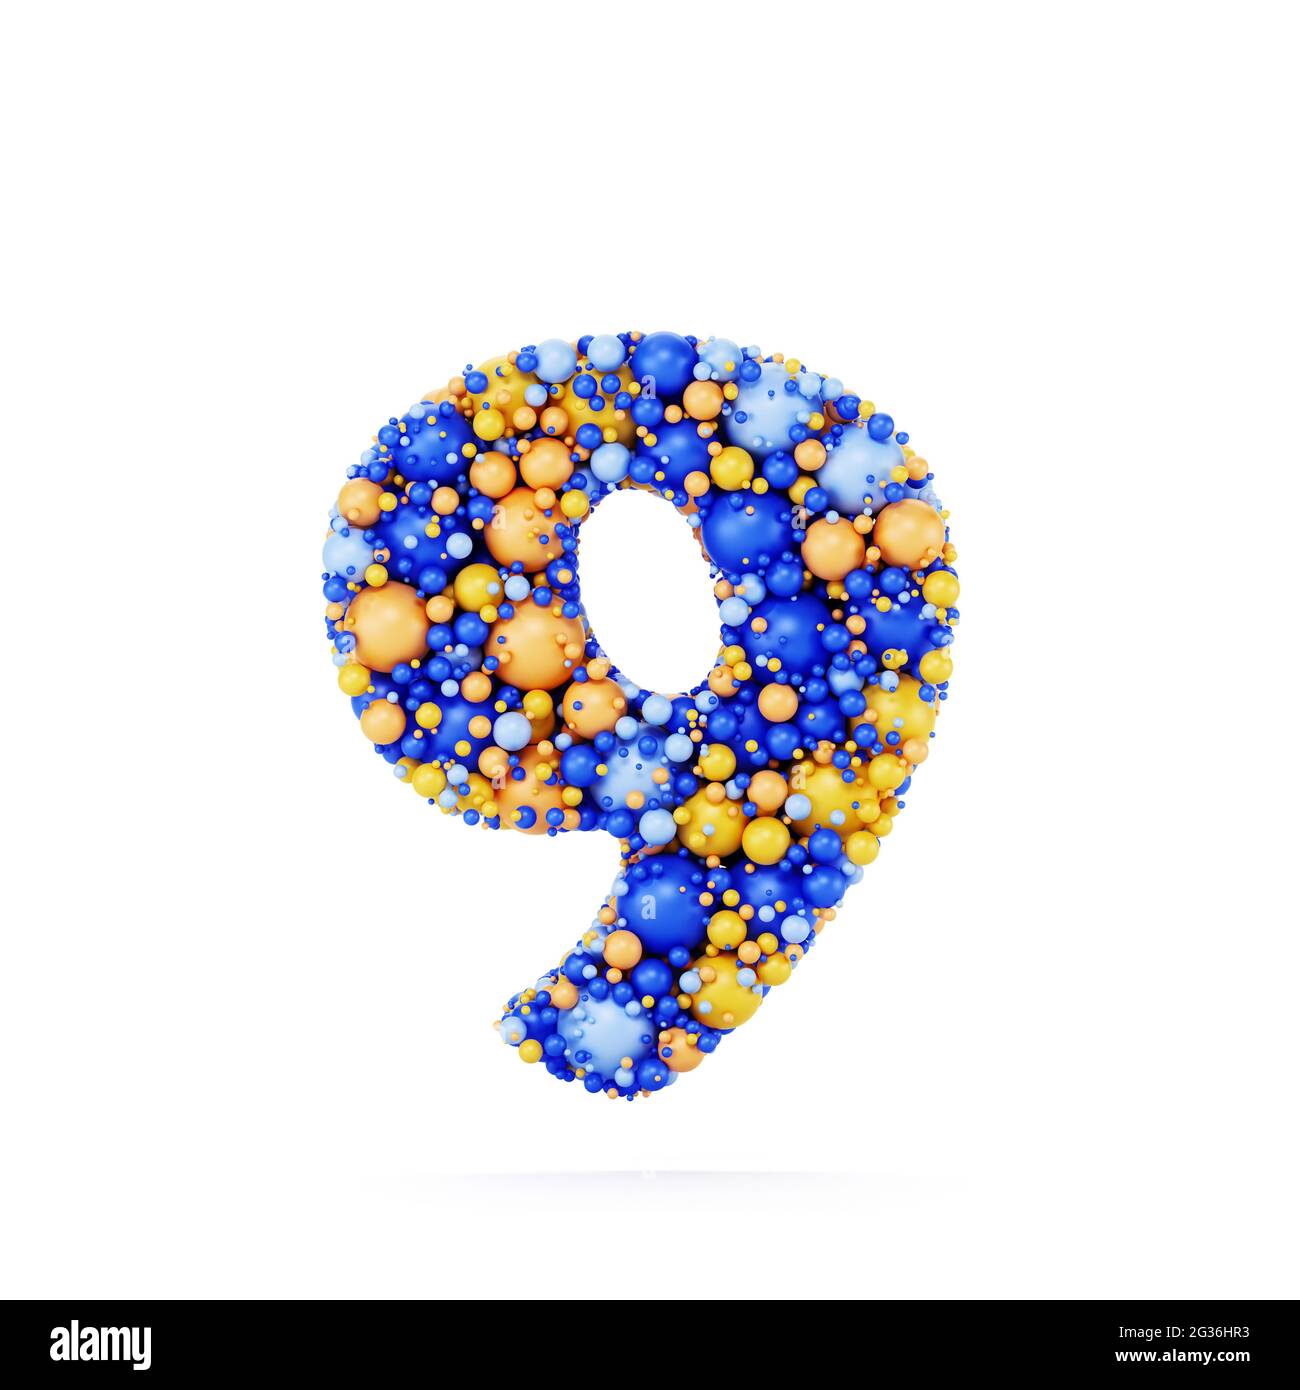 9 nine number digit with colored shiny balls. Realistic 3d rendering illustration. Isolated on white background with shadow cast Stock Photo